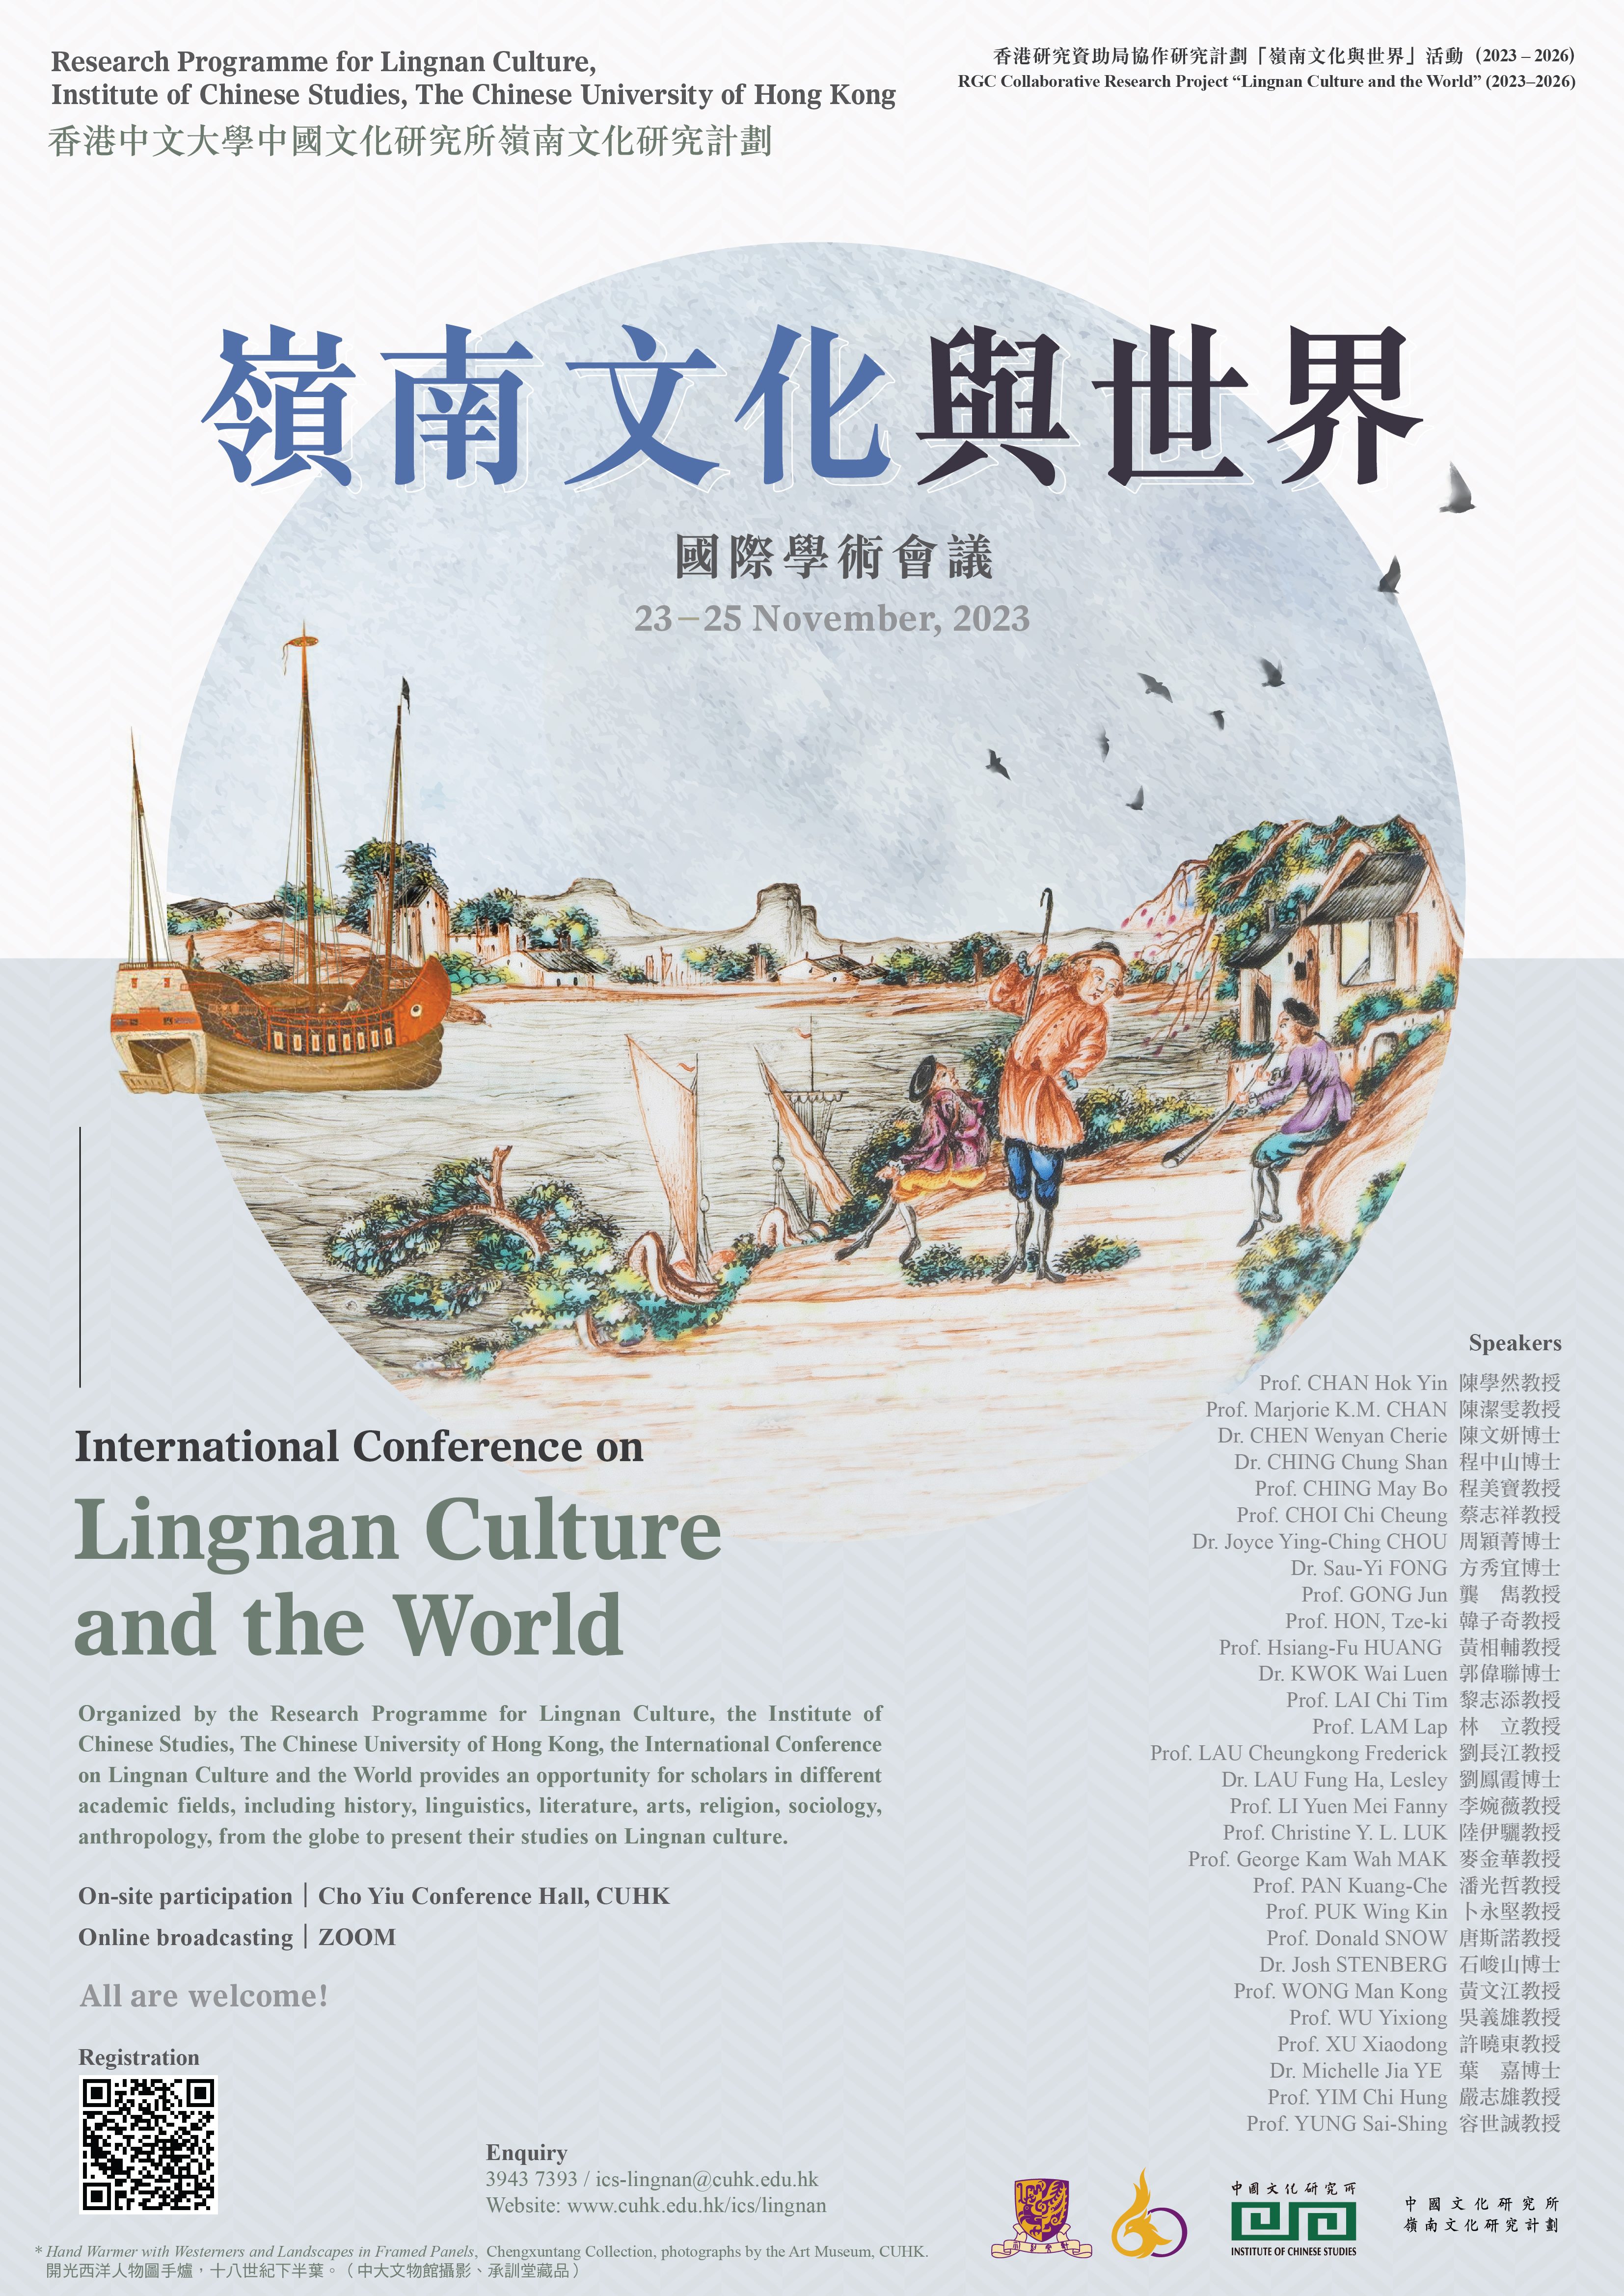 International Conference on Lingnan Culture and the World